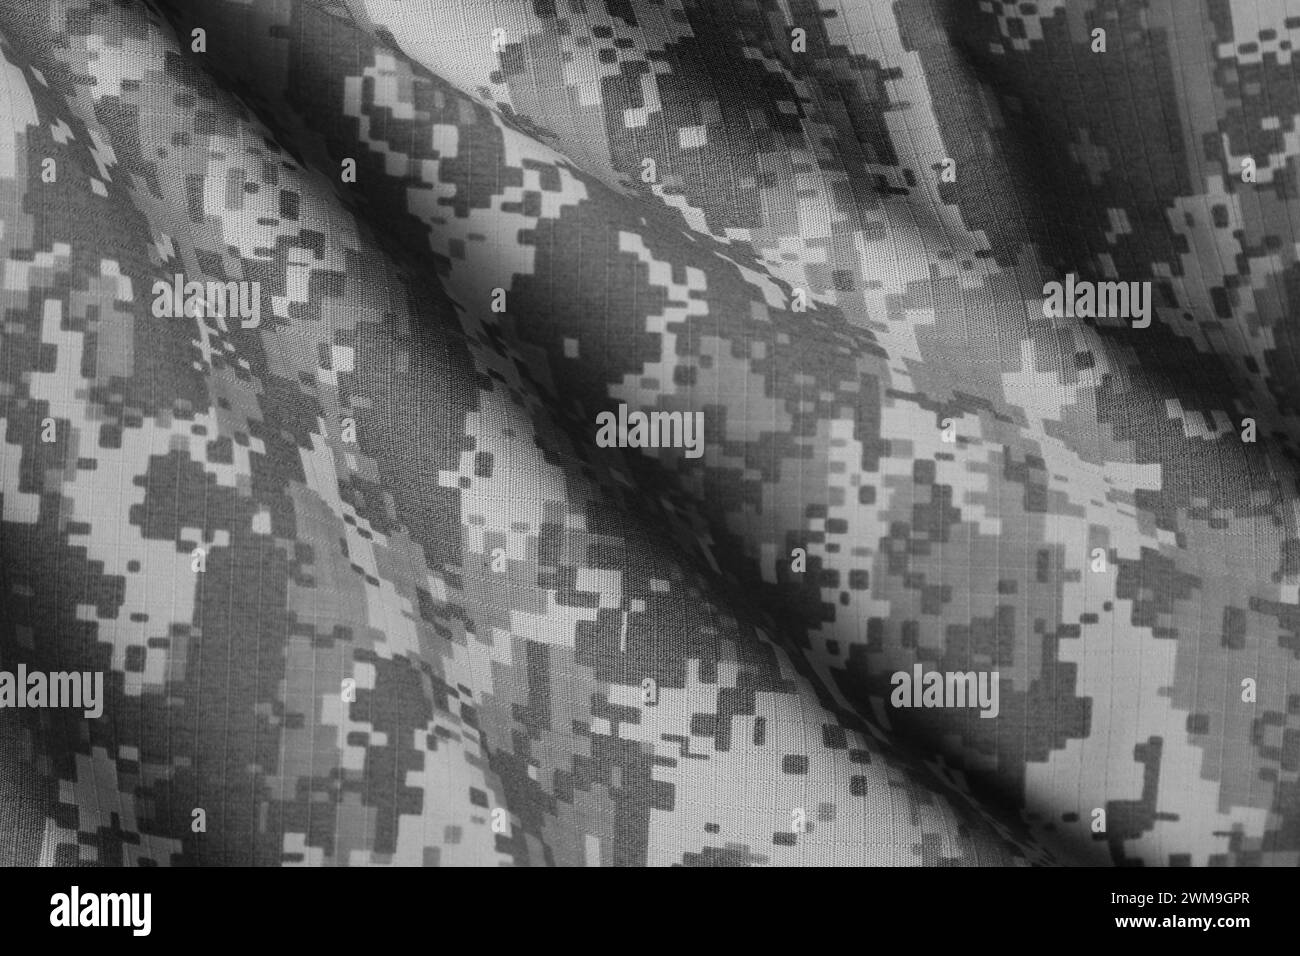 Texture of crumpled camouflage fabric as background, top view. Black and white effect Stock Photo